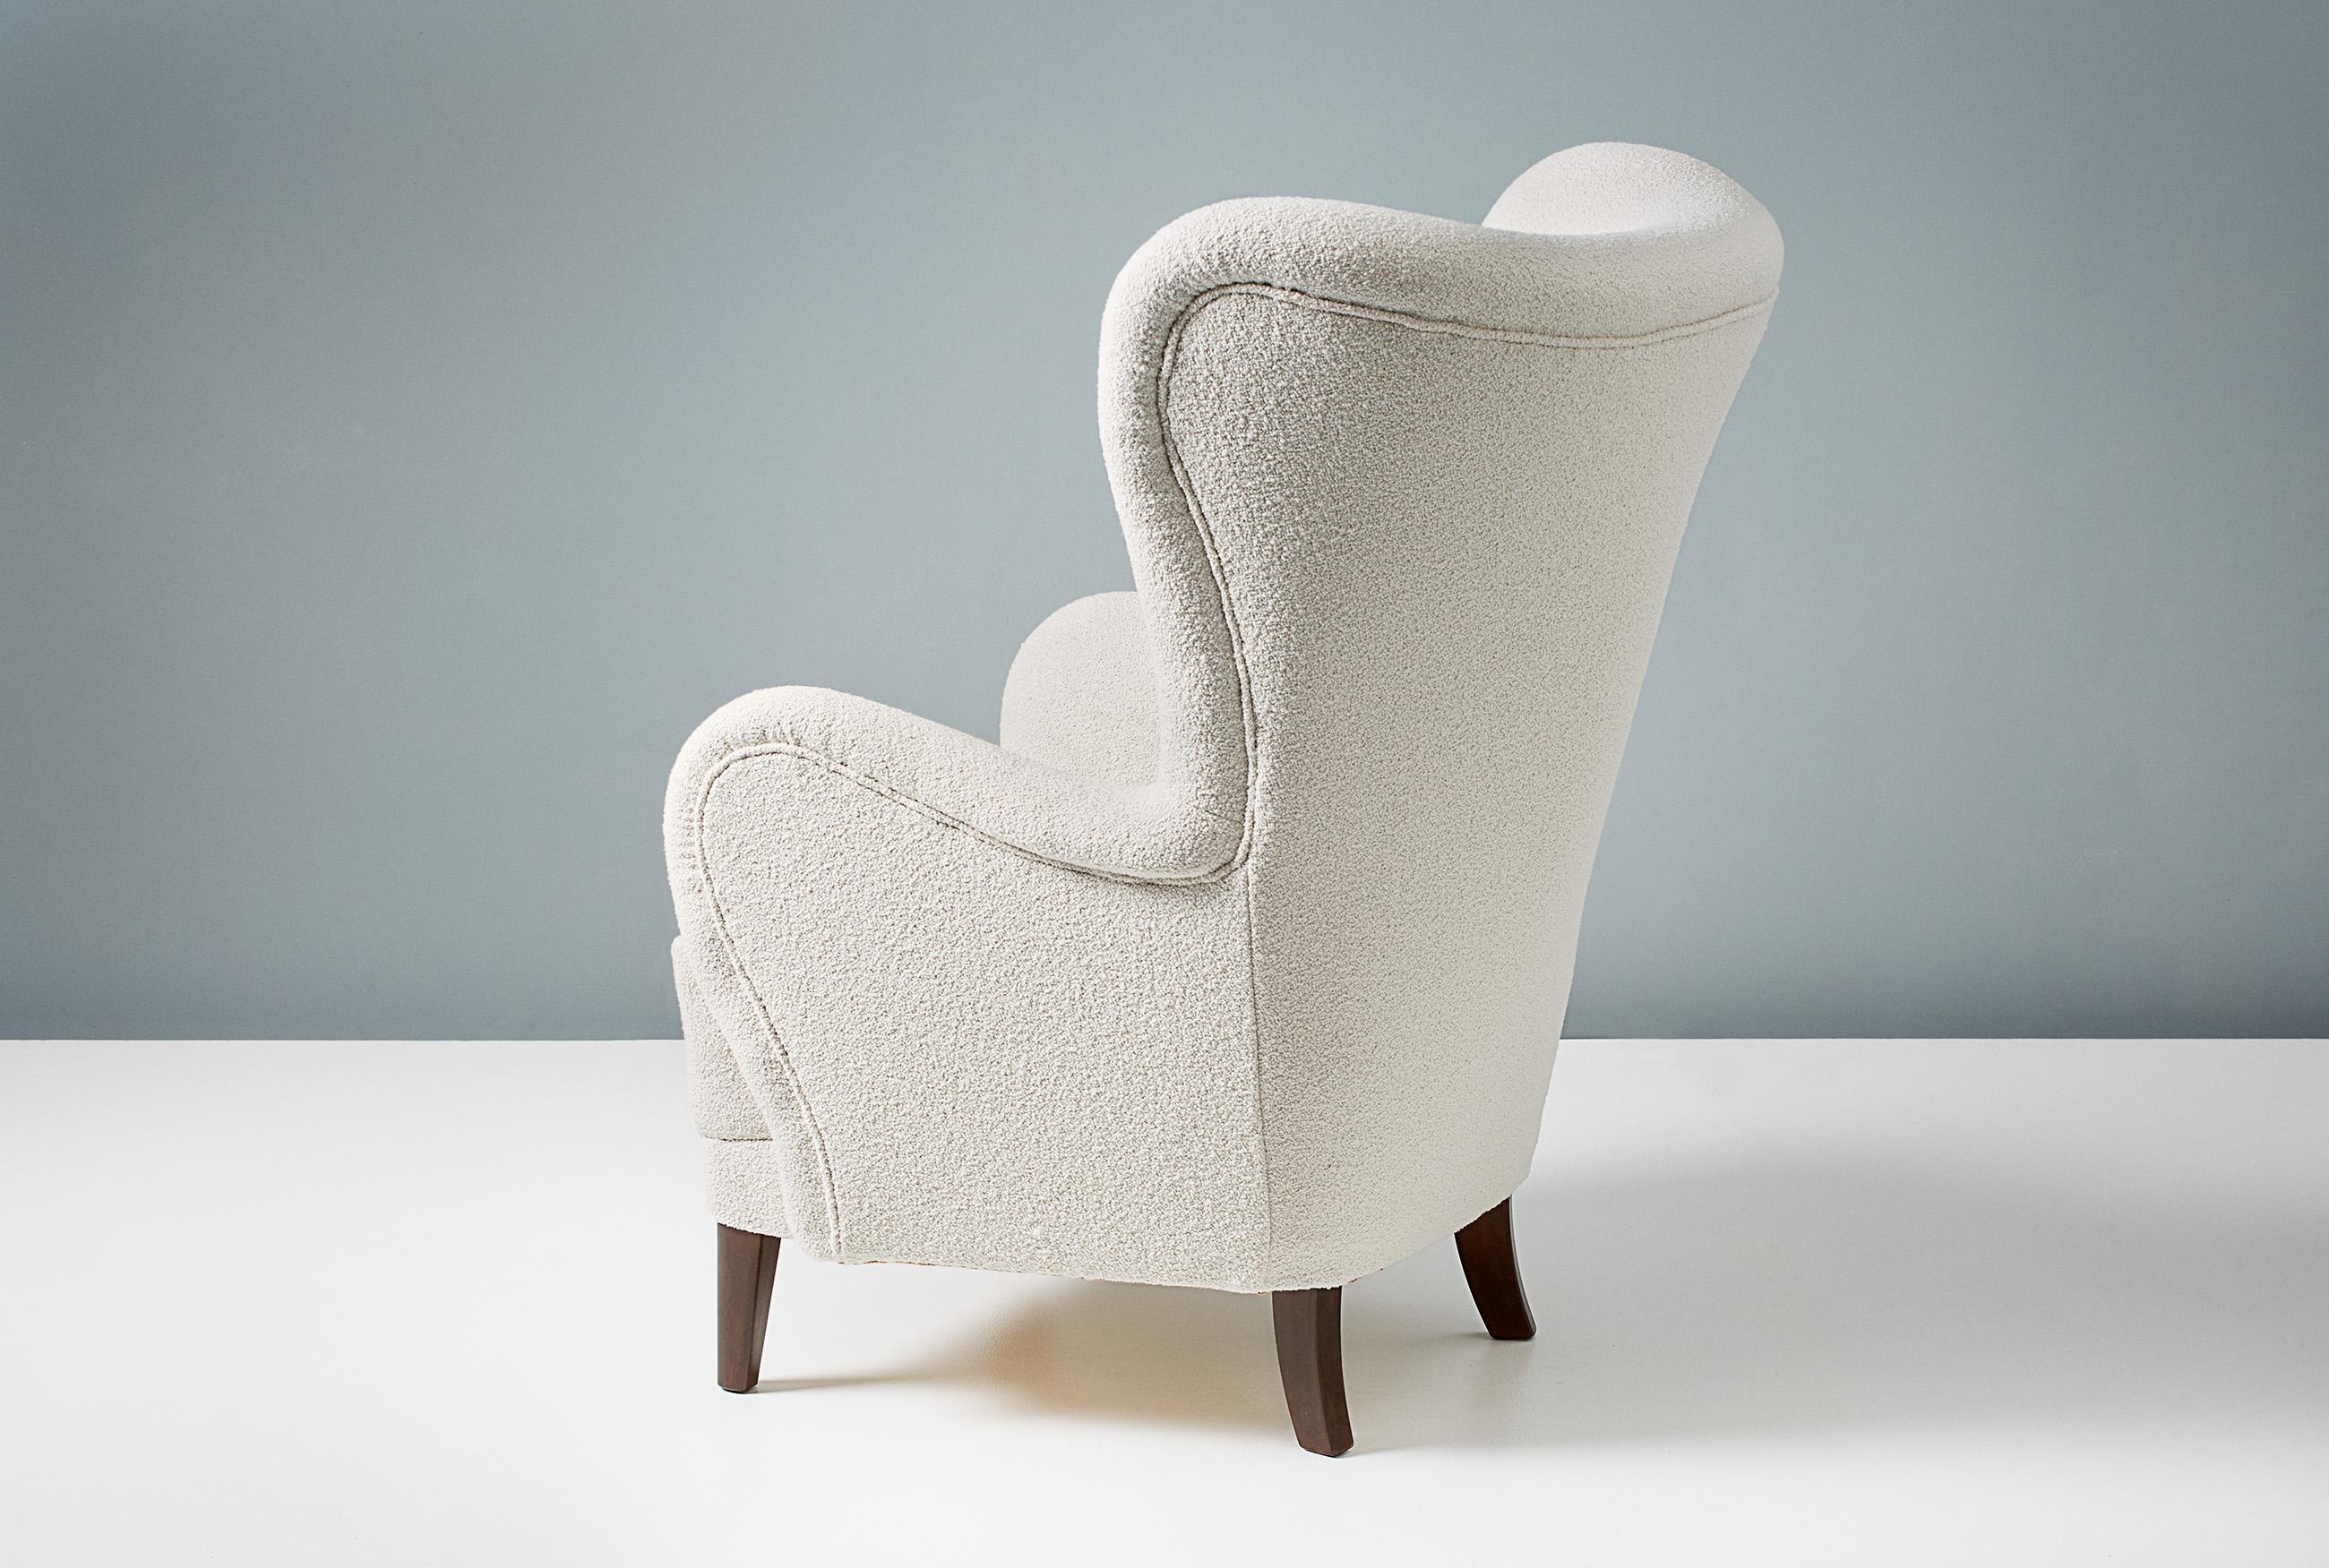 A custom-made wing chair developed & produced at our workshops in London using the highest quality materials. The frame is built from solid tulipwood with a fully sprung seat. This example is upholstered in Chase Erwin ‘Embrace’ boucle fabric and